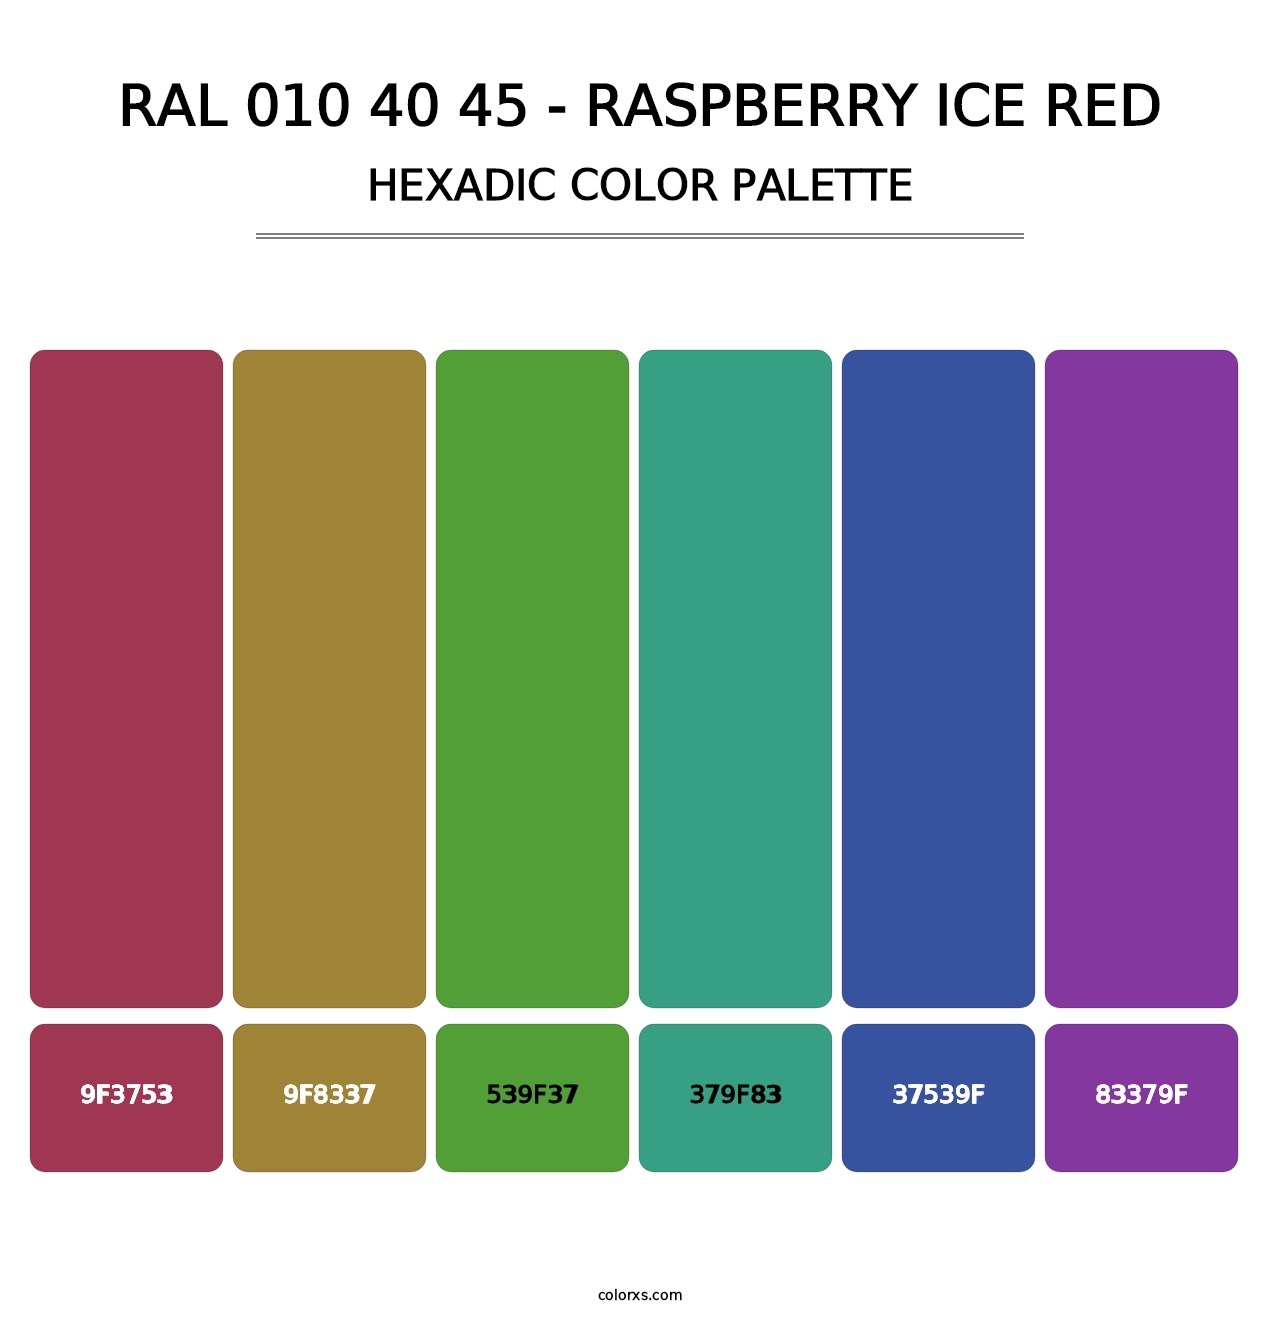 RAL 010 40 45 - Raspberry Ice Red - Hexadic Color Palette